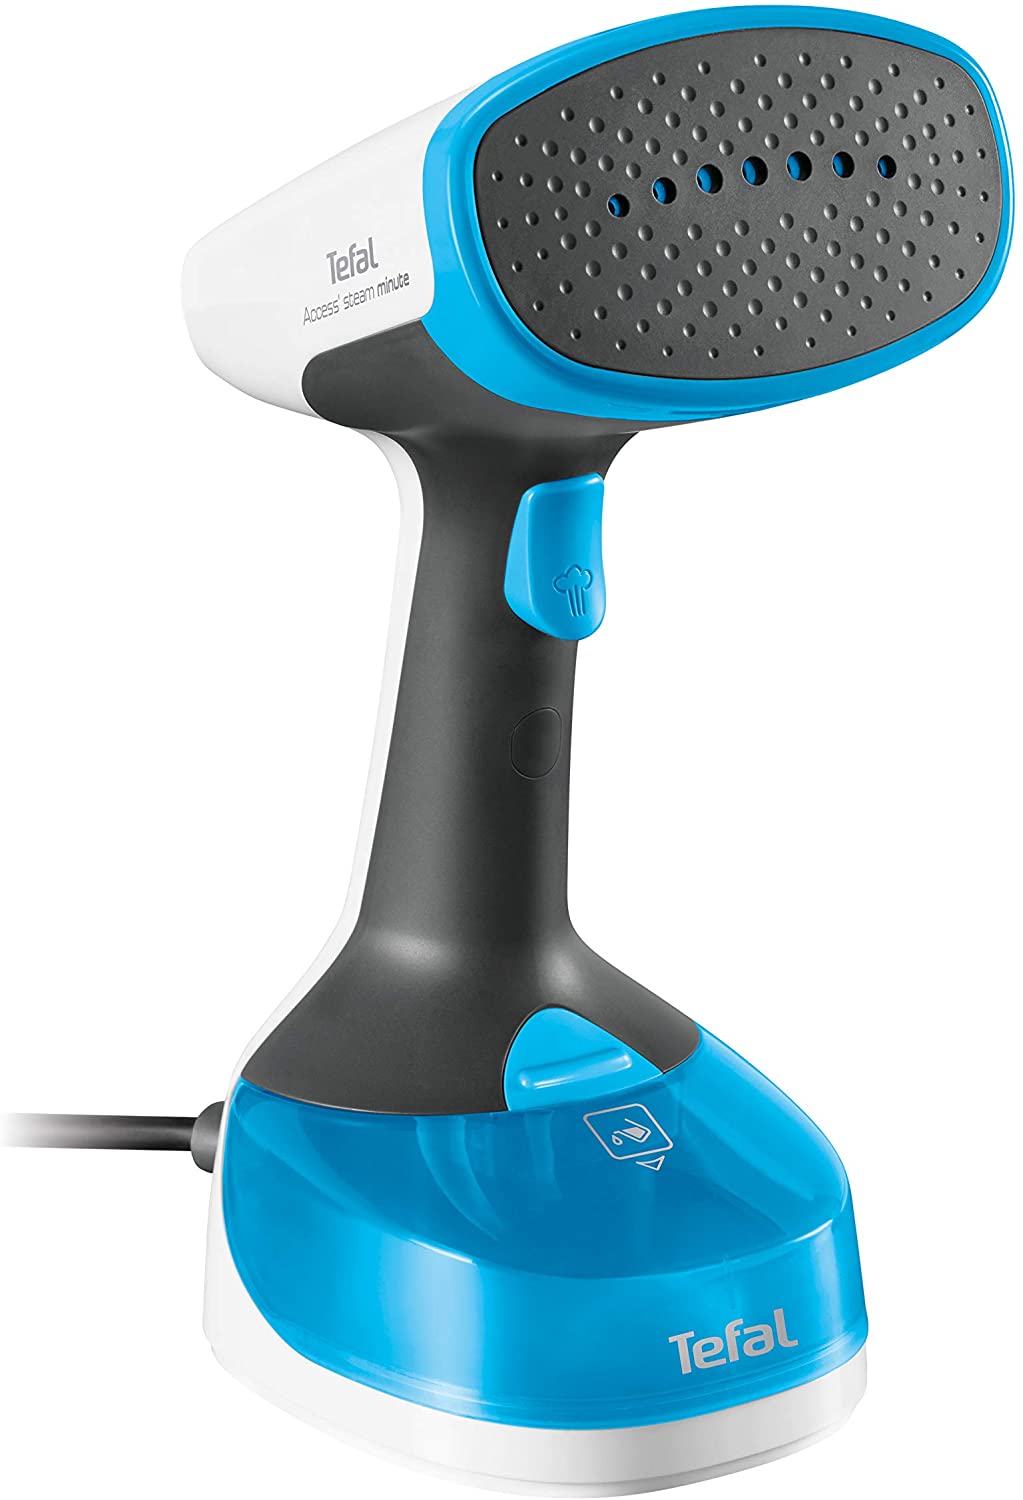 Tefal DT7000 Access Steam Minute Steam Brush (1100 Watts, Includes Accessories, 1 Steam Level, Tank Filling Quantity: 150 ml), Blue / Black / White